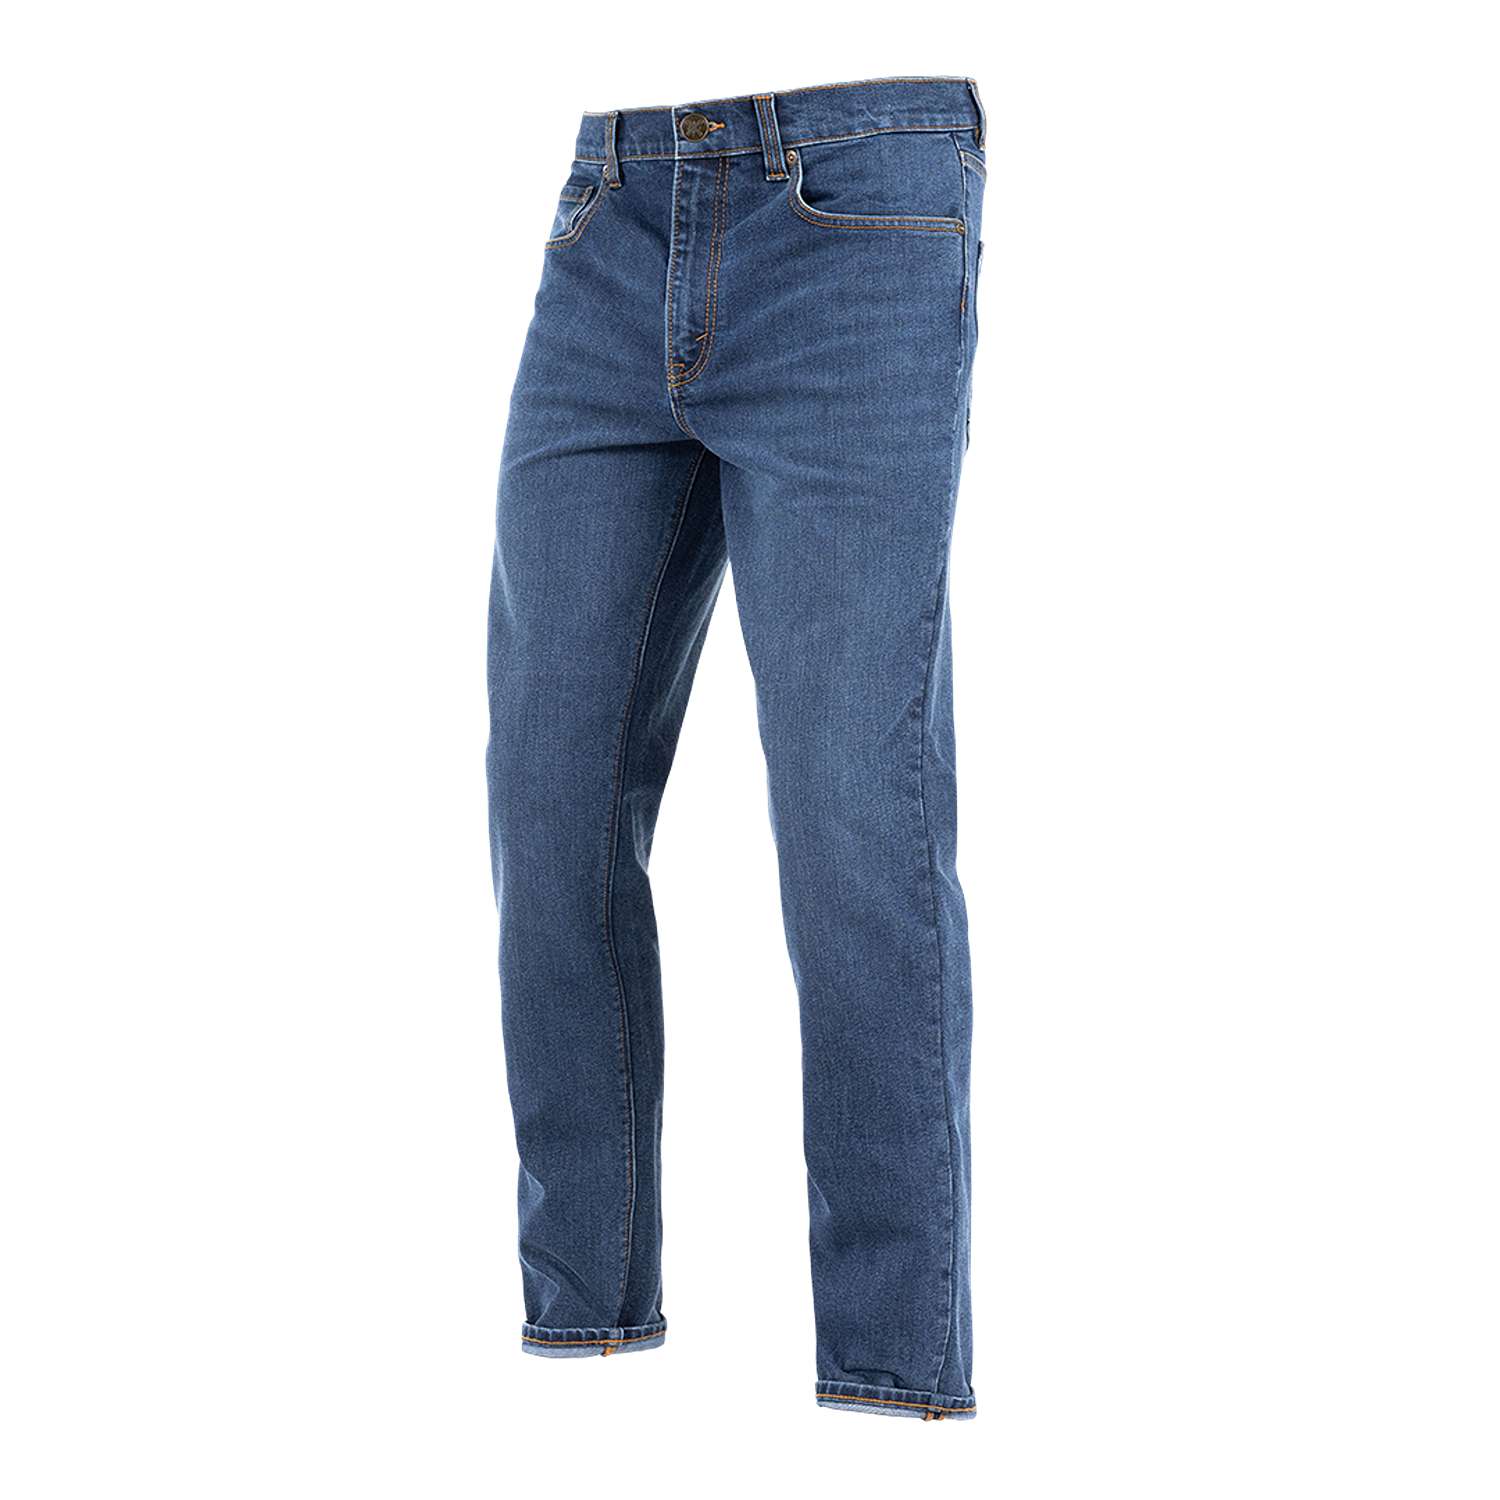 Image of John Doe Classic Tapered Jeans Indigo Taille W31/L32